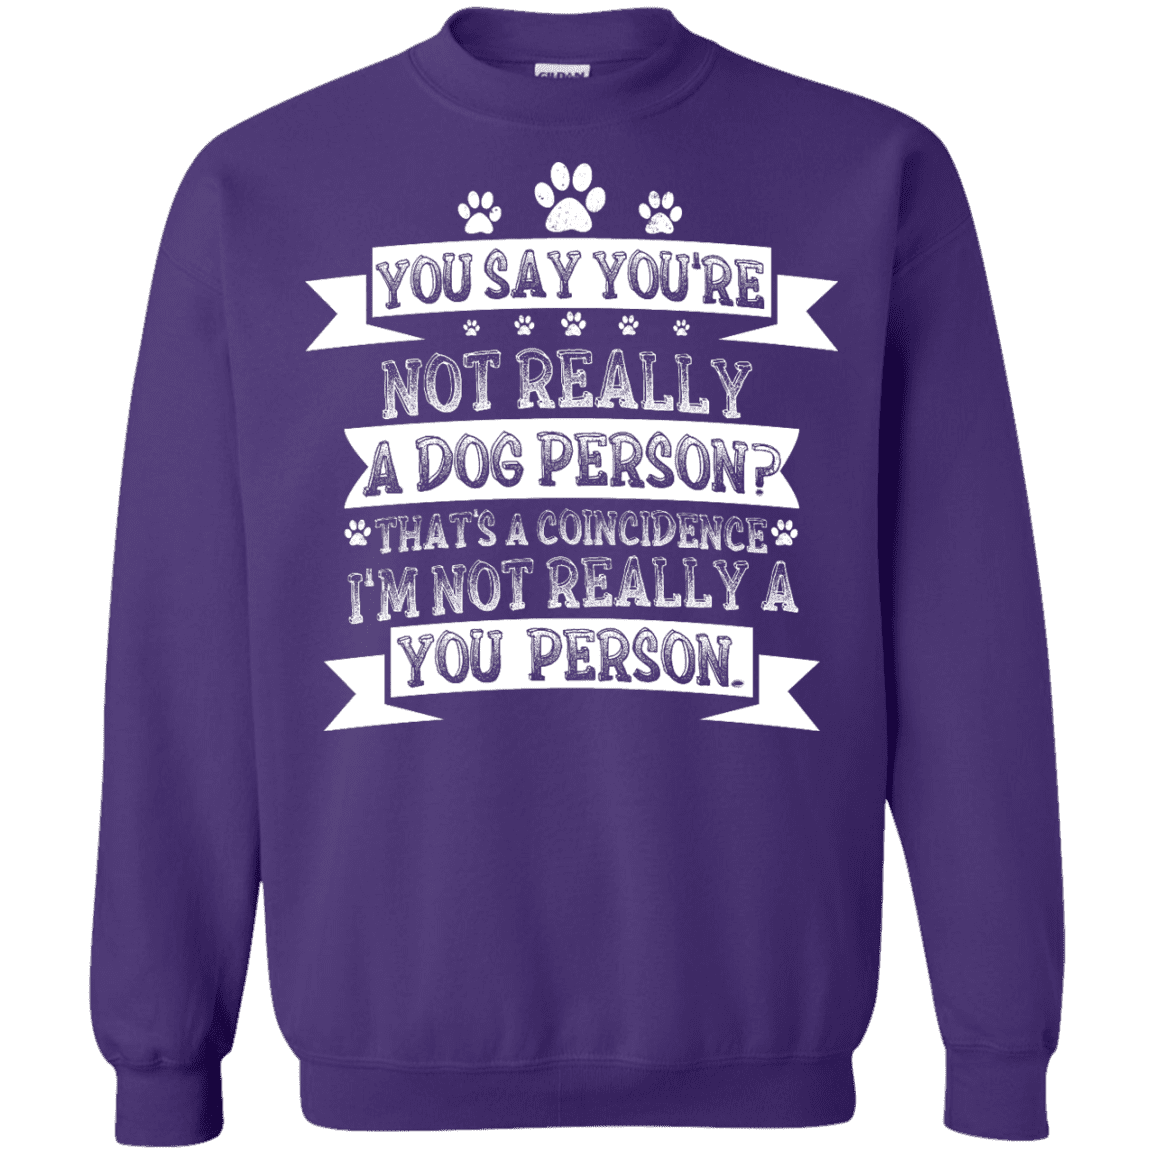 Not Really A You Person - Sweatshirt.